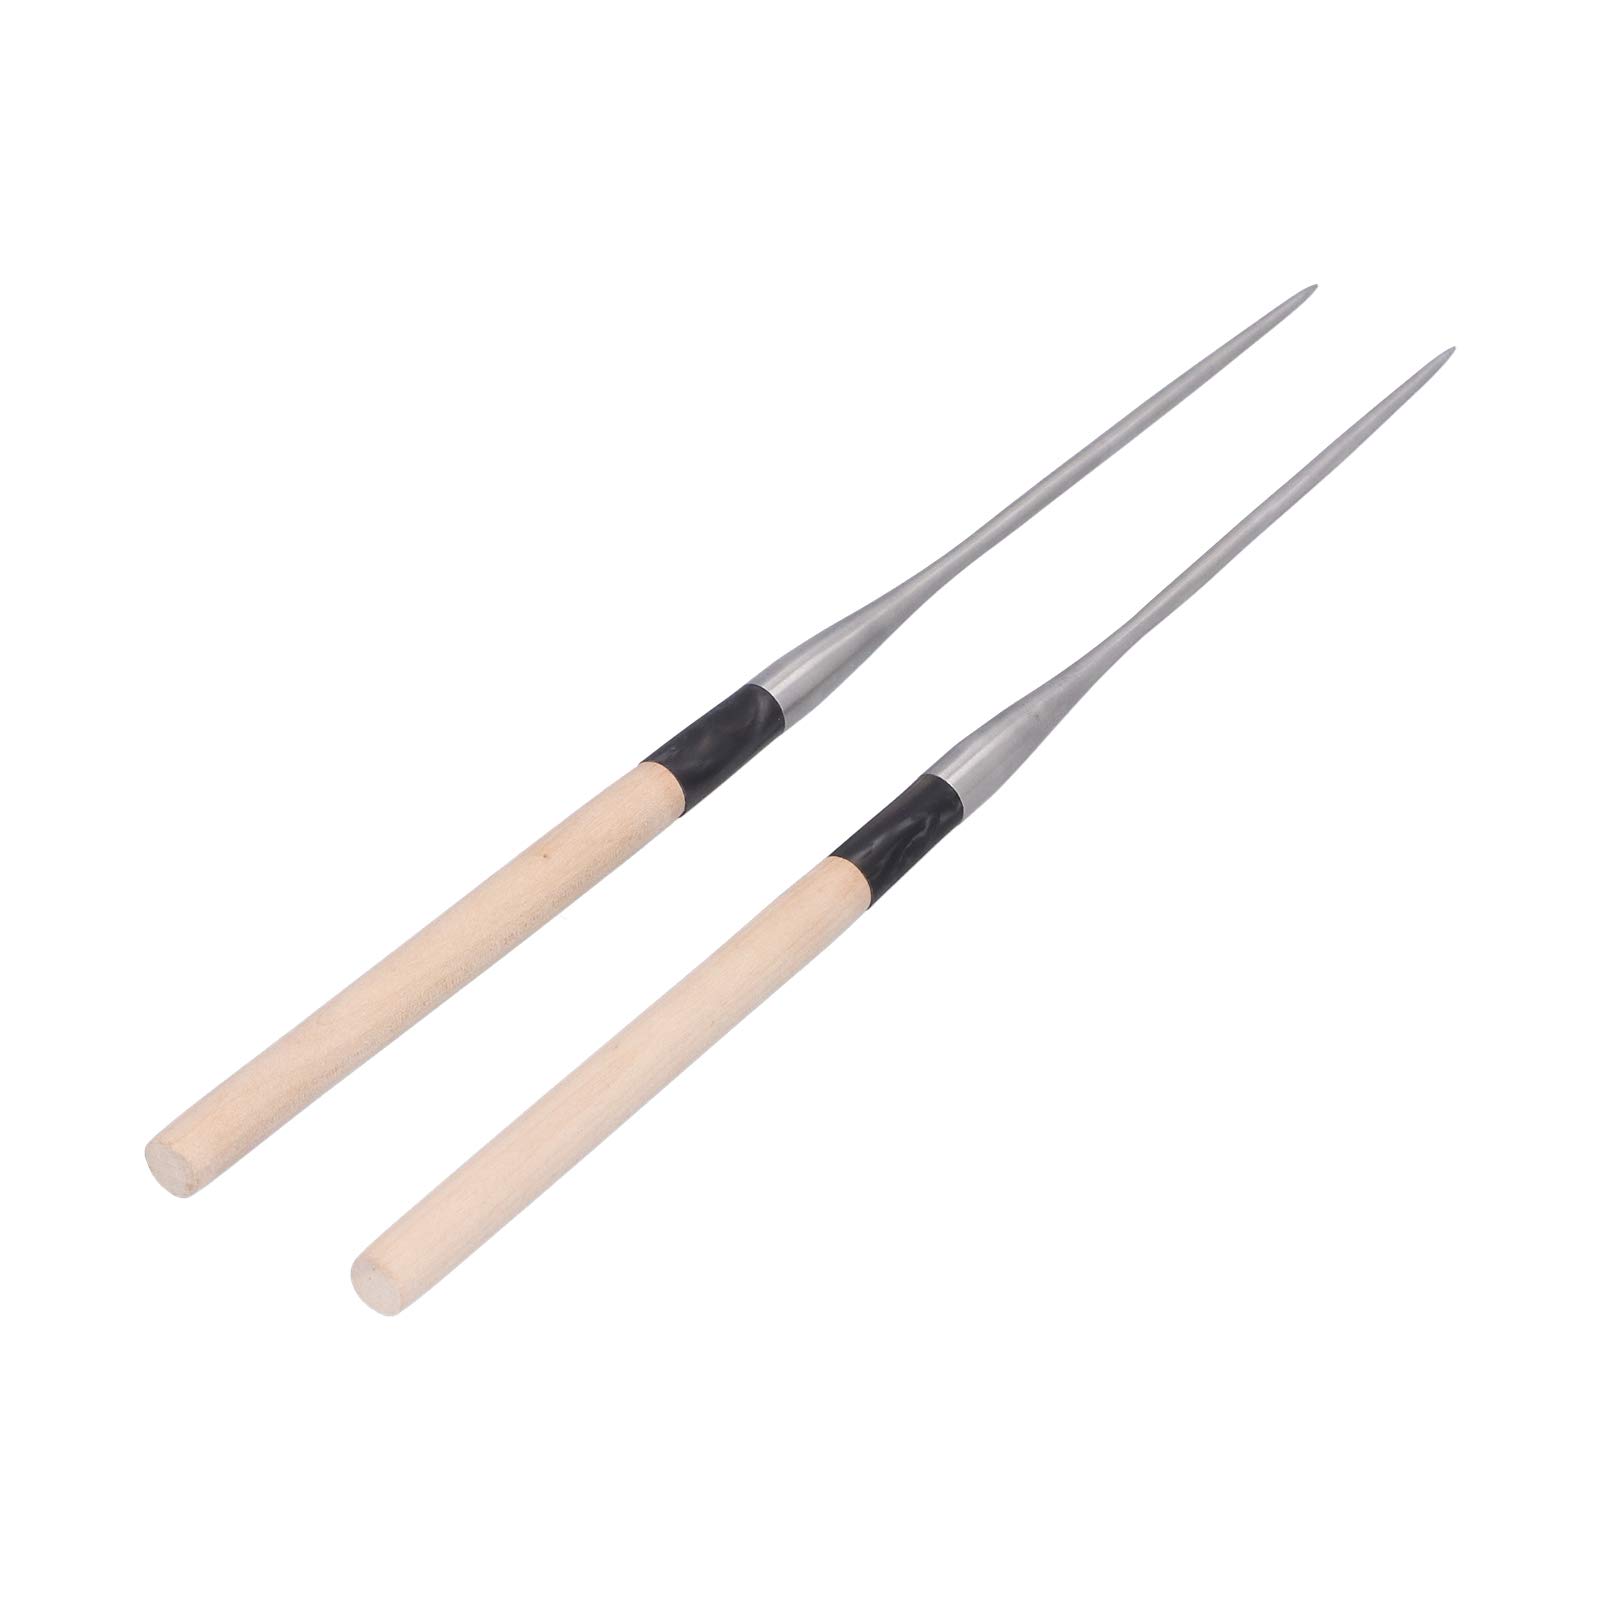 Alvinlite 11.61" Wood Handle Chopsticks, 1 Pairs Premium Reusable Stainless Steel Pointed Chopsticks for Japanese Sushi South Korea Kimbap, Chop Sticks with Gift Case for home office Kitchen